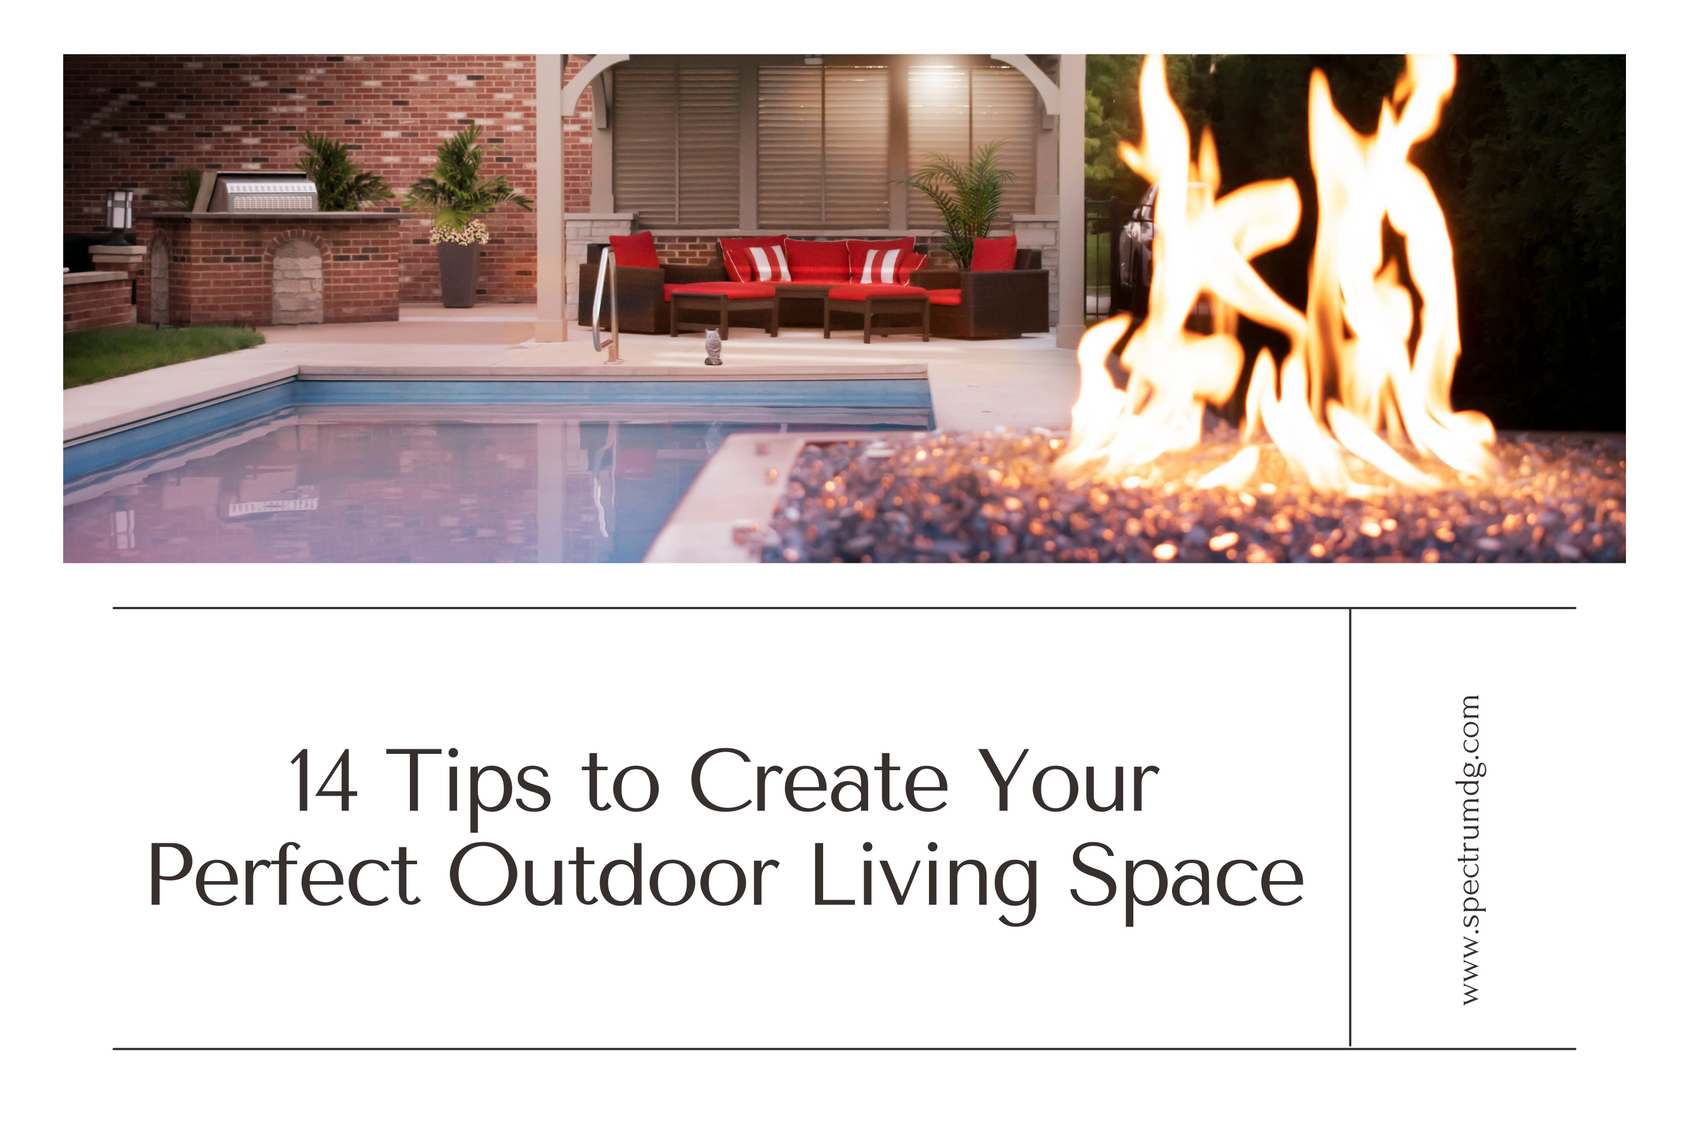 14 Tips to Create Your Perfect Outdoor Living Space